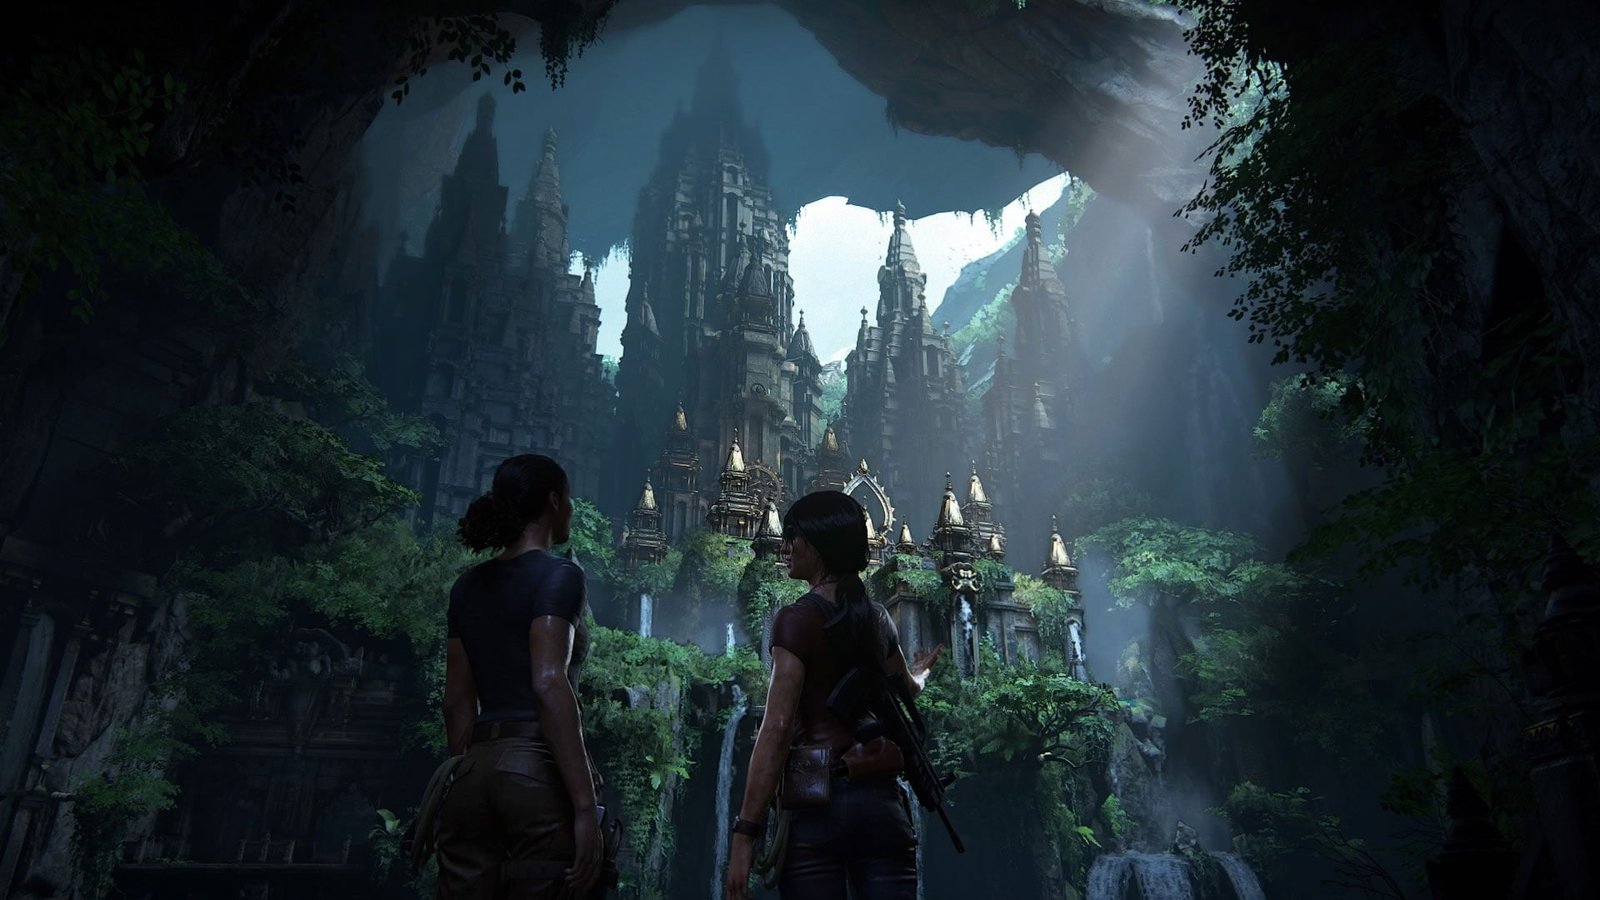 Review – Uncharted: The Lost Legacy